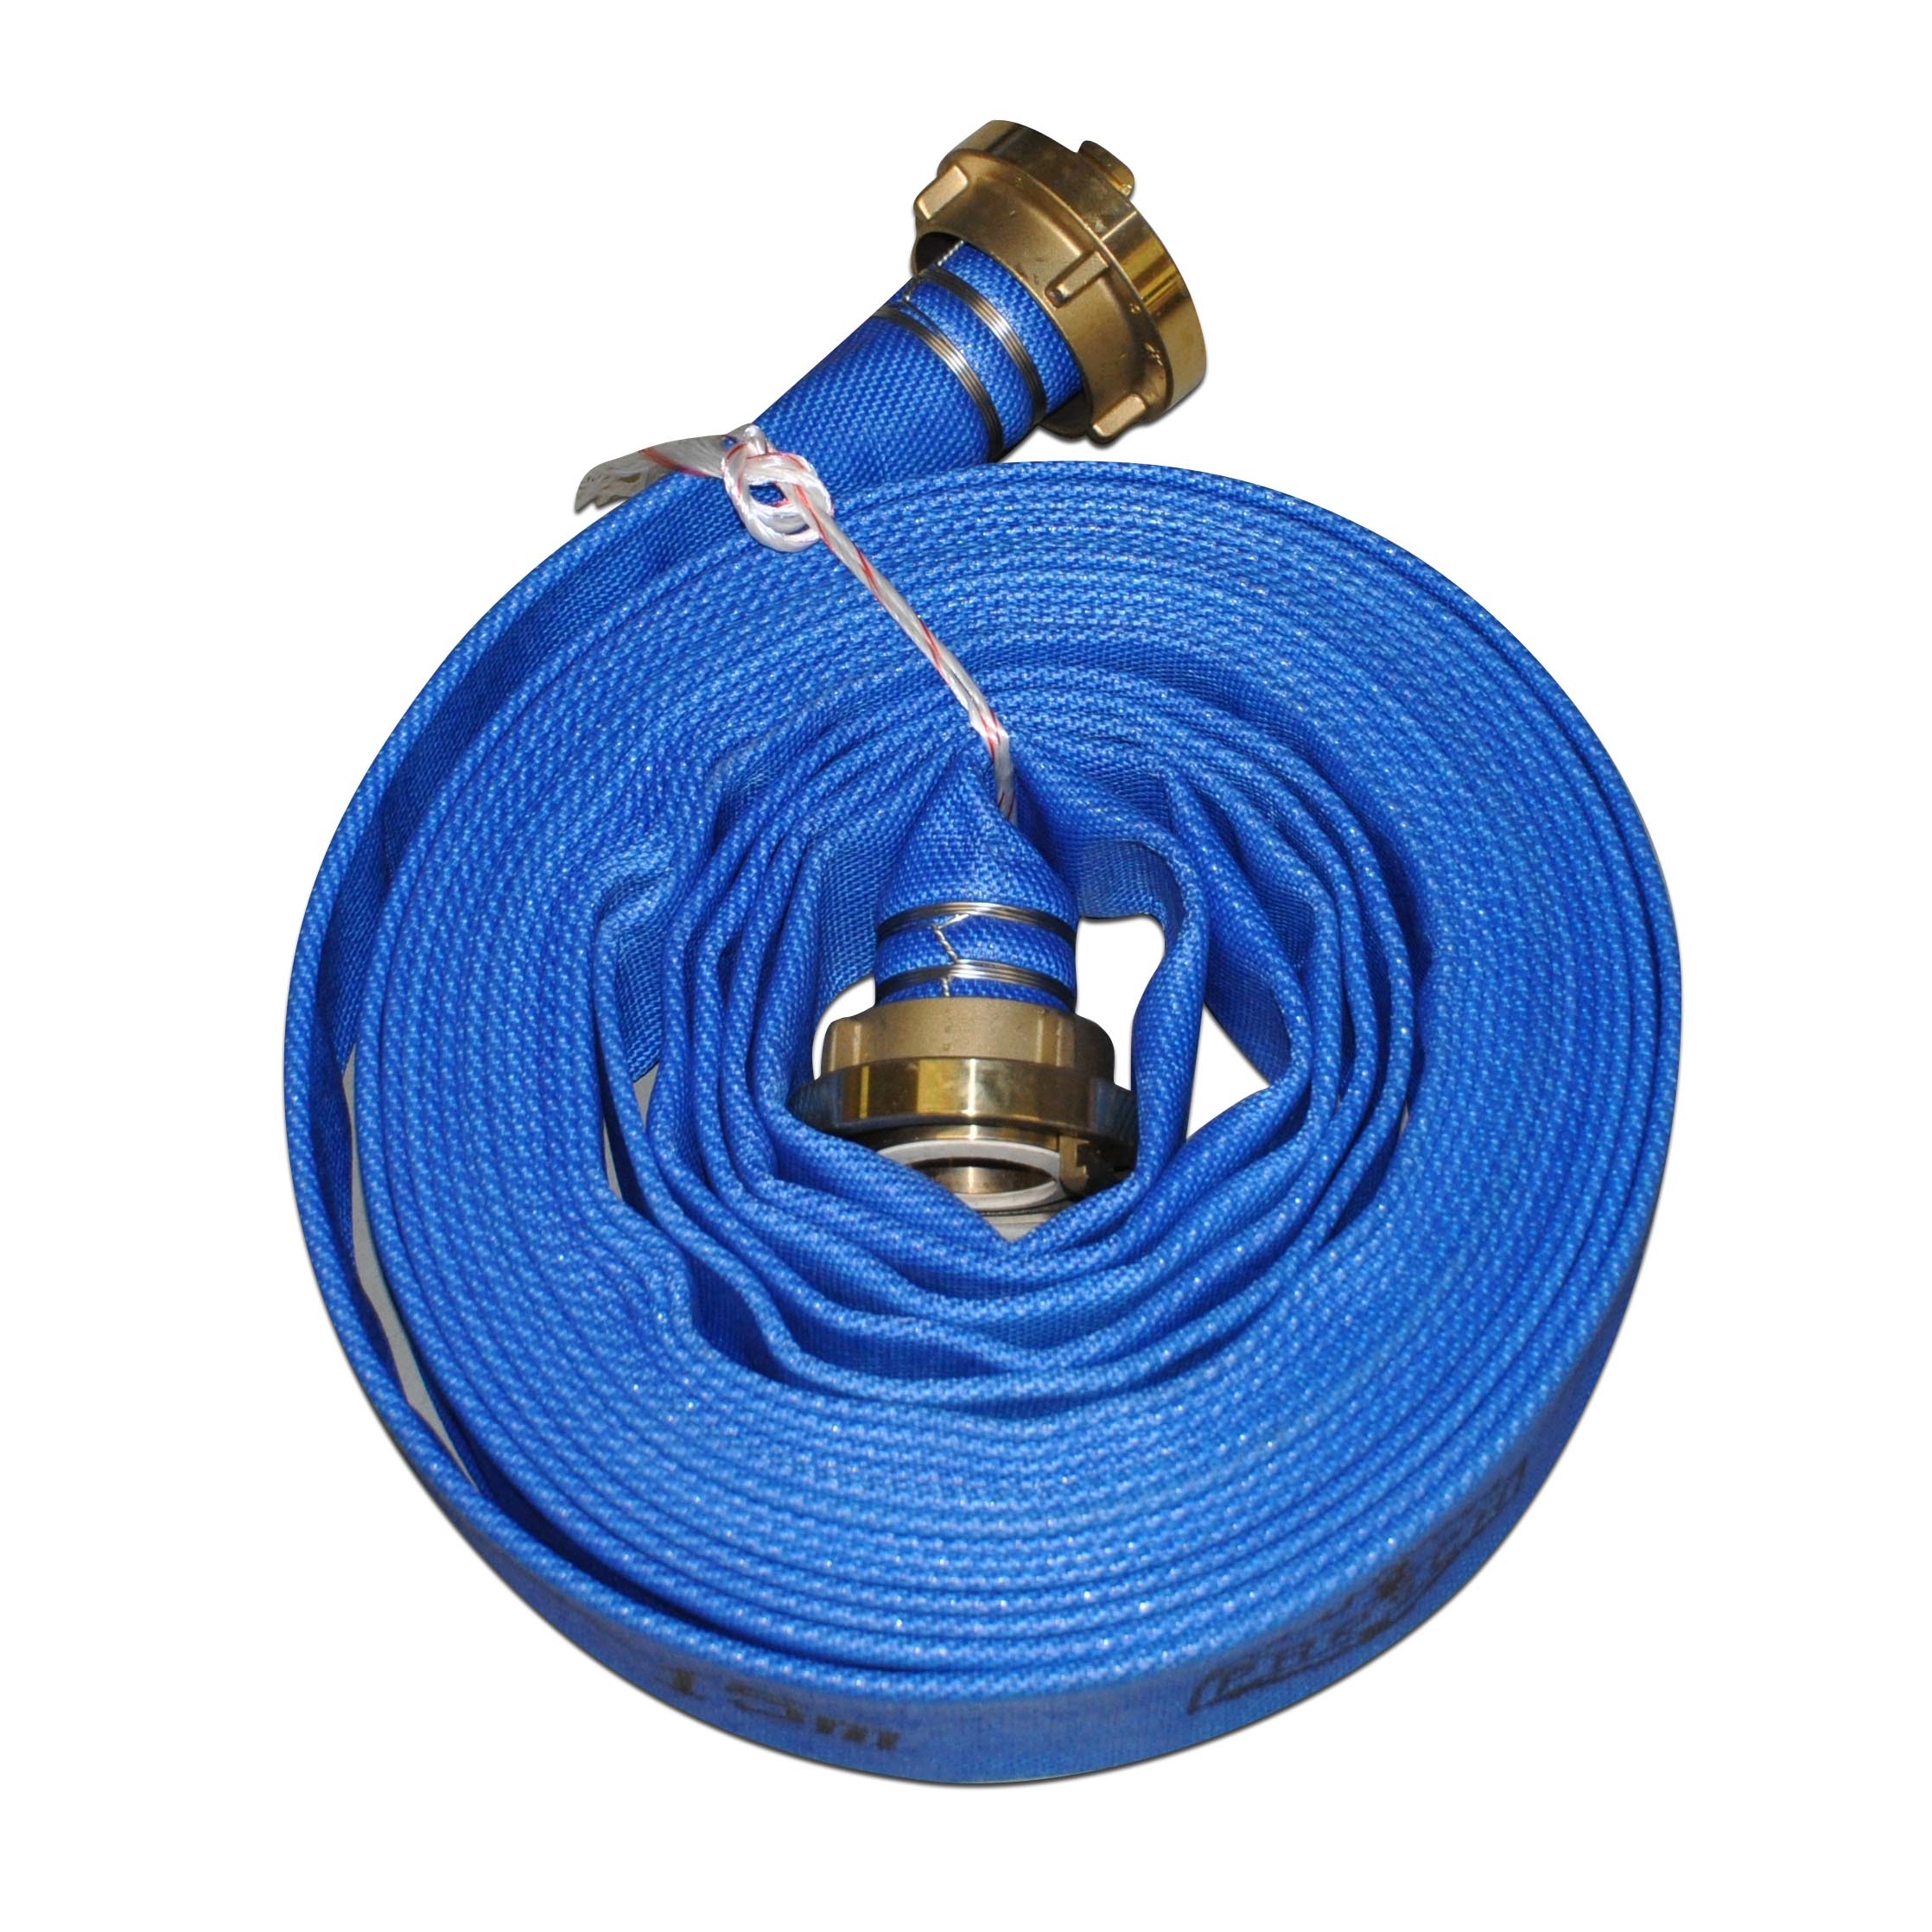 Filling hose water -Storz C - 15 m for drinking water (accessoriese pipe hanger) couplings brass